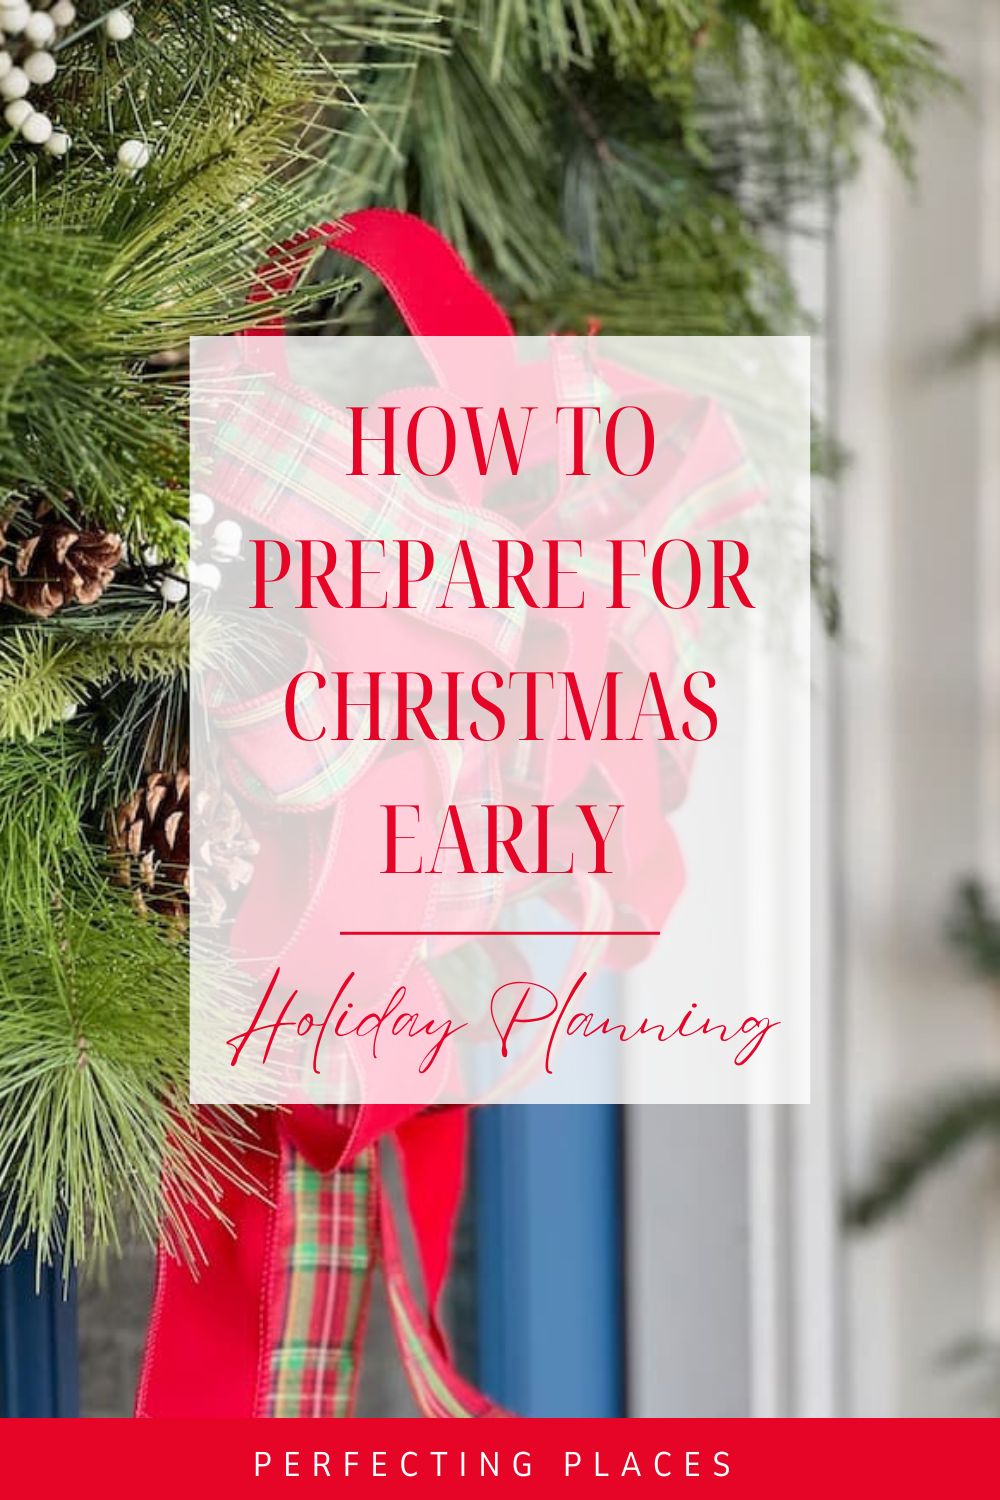 Holiday Planning: How to Prepare for Christmas Early - Perfecting Places